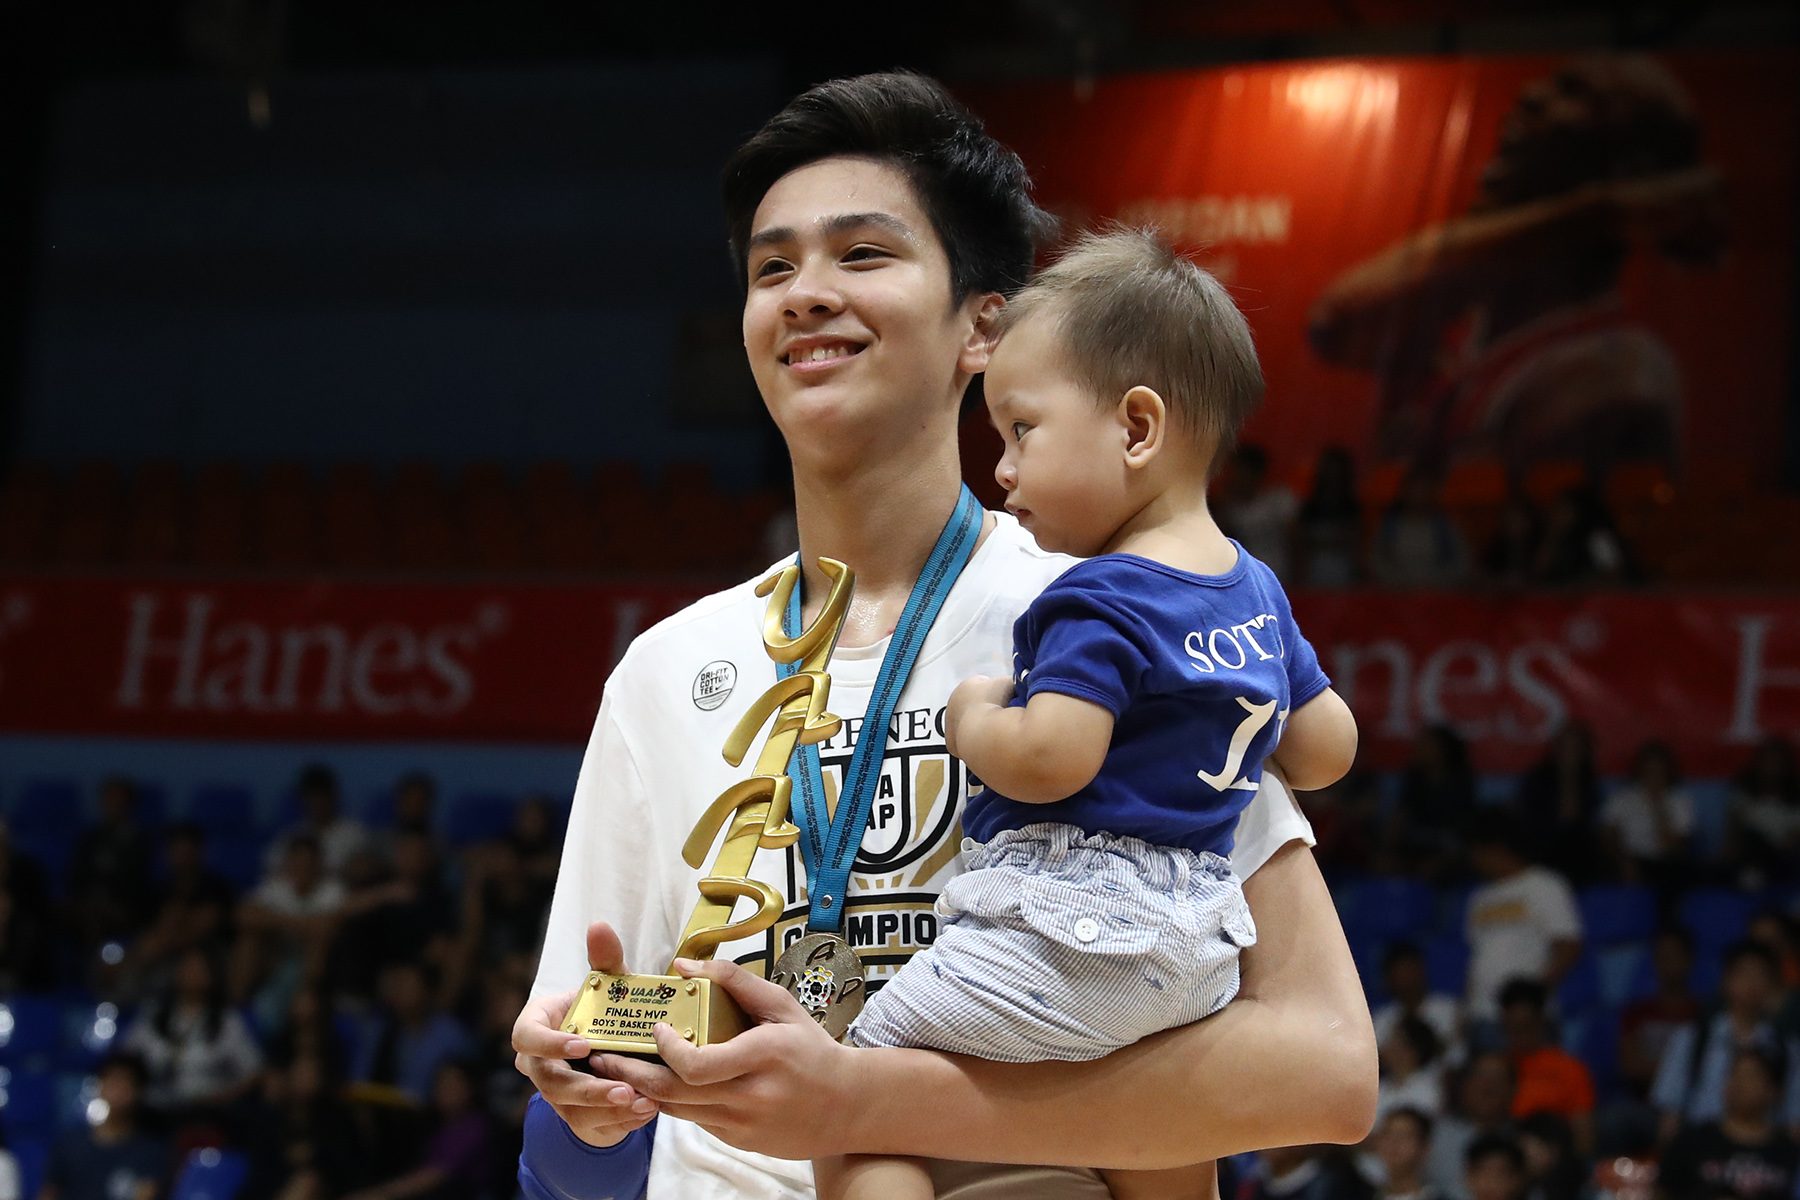 Finals MVP Kai Sotto ‘the happiest man in the Philippines’ after Ateneo’s title win